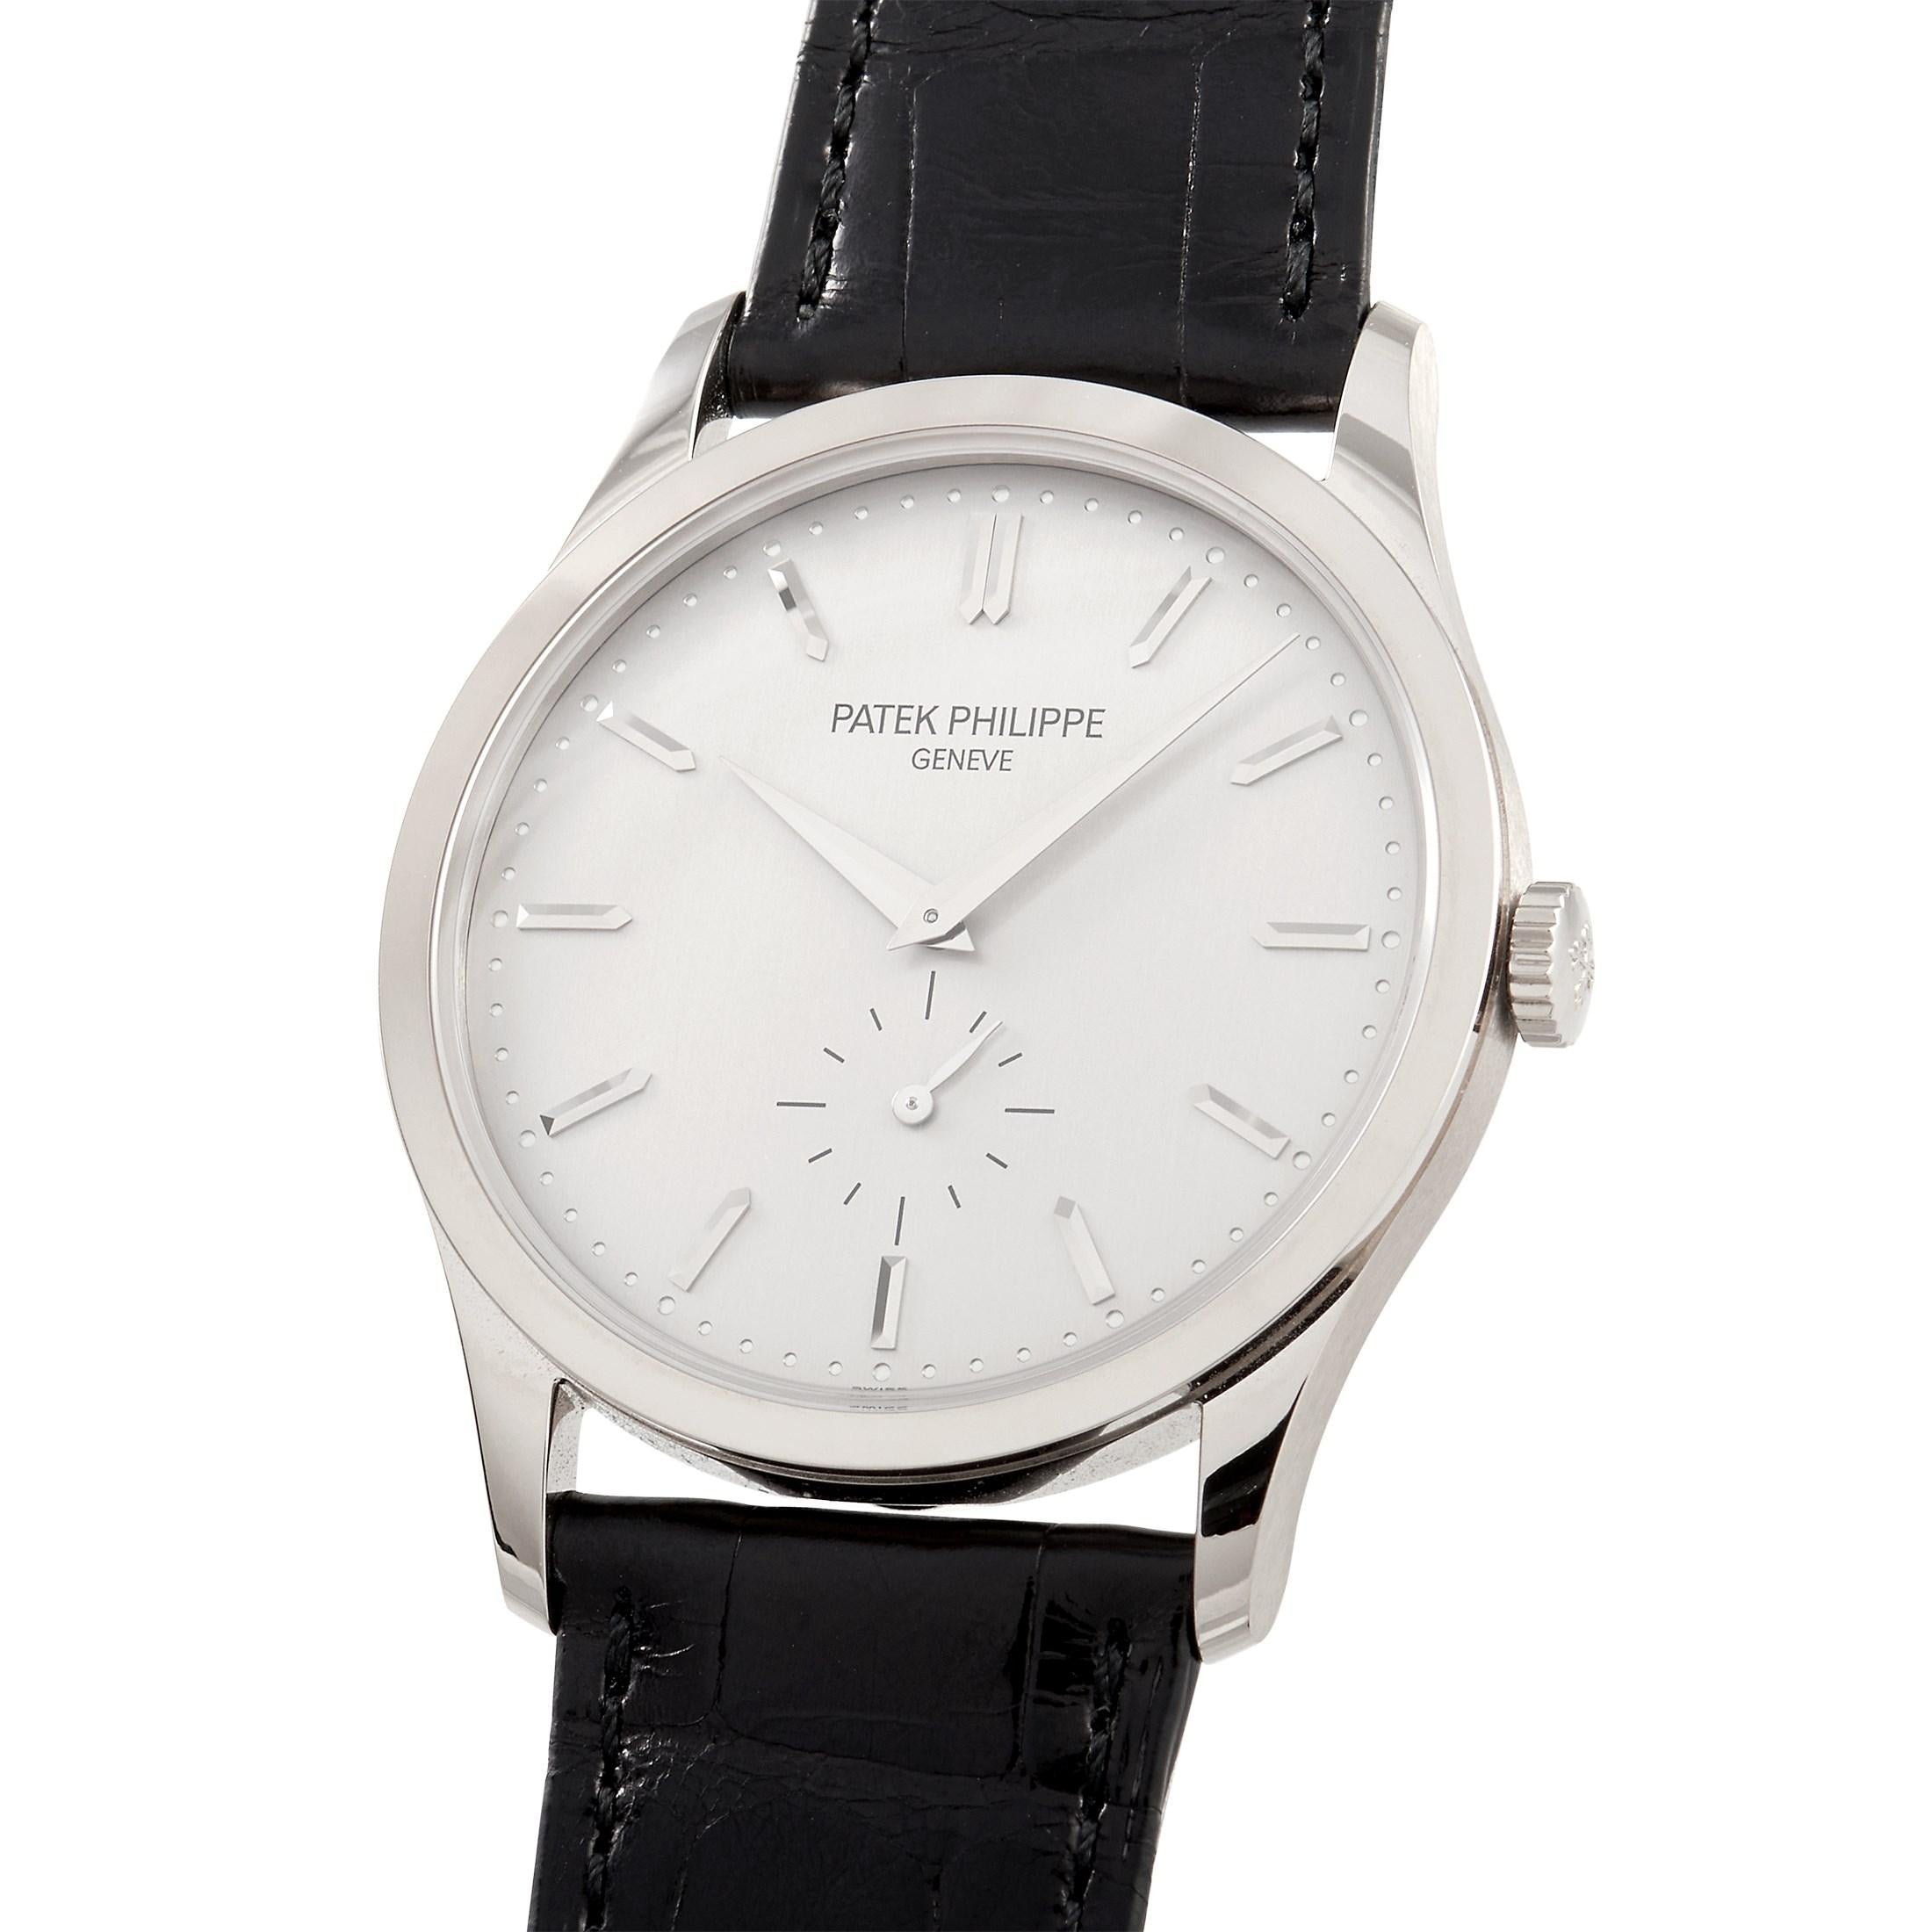 The Patek Philippe Calatrava Men’s Watch, reference number 5196G-001, possesses a sleek sense of sophistication that will never go out of style. 

This timepiece’s 37mm case is crafted from luxurious 18K White Gold, which perfectly complements the